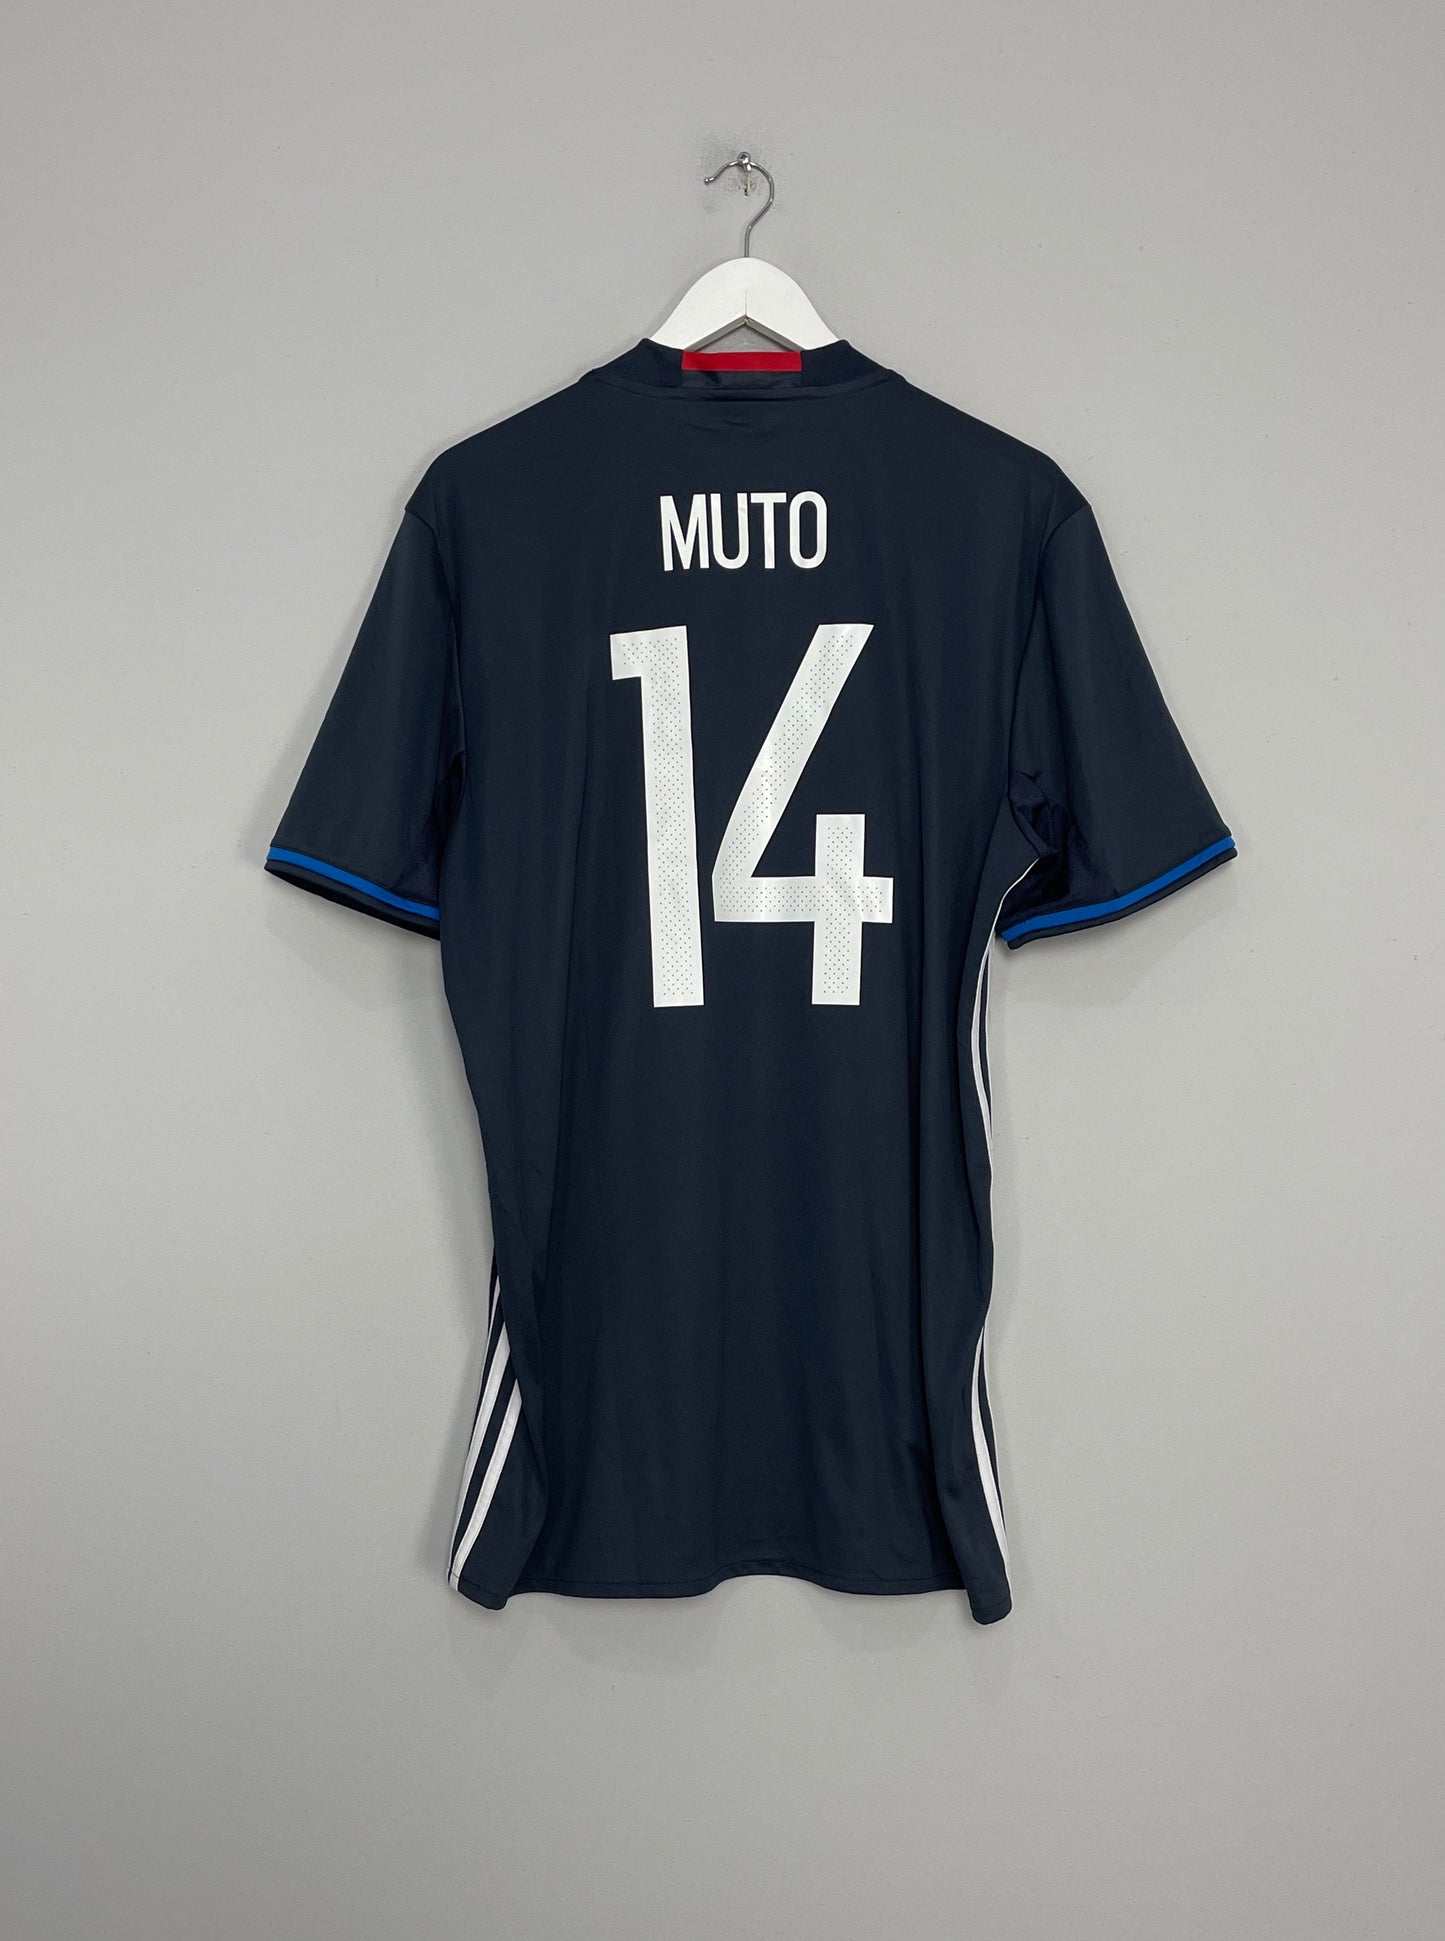 Image of the Japan Muto shirt from the 2016/17 season